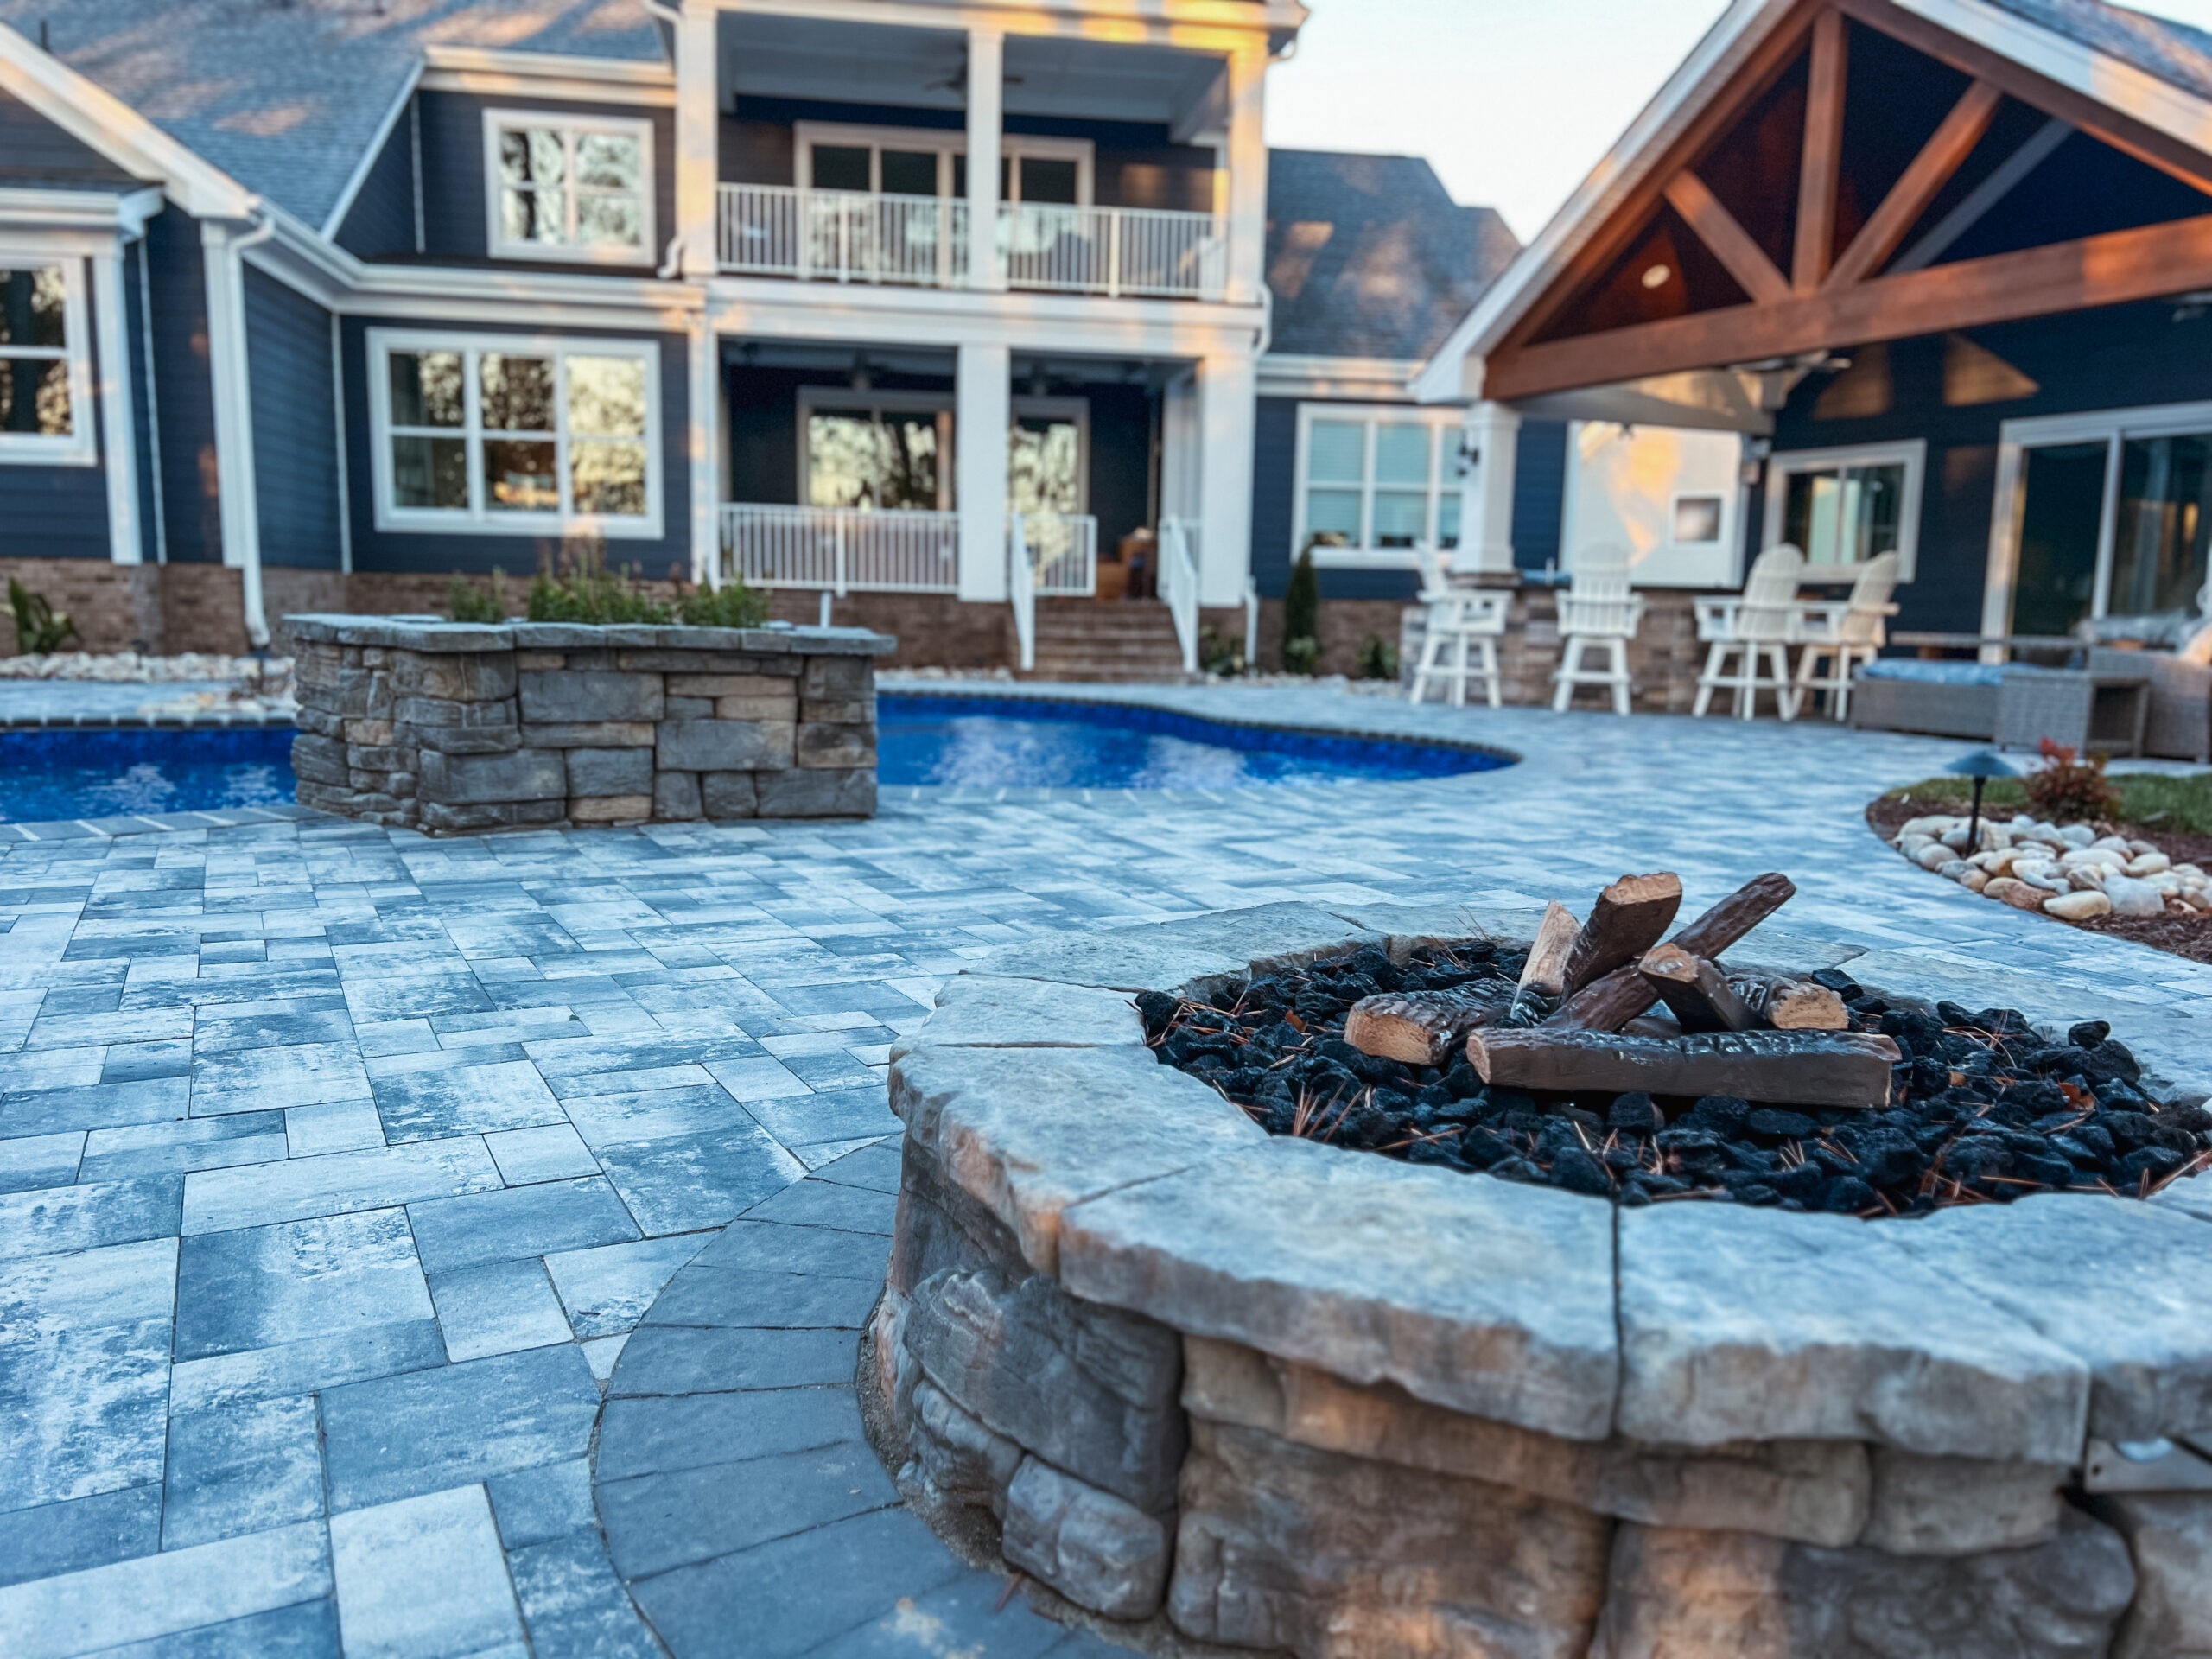 paver patio with firepit